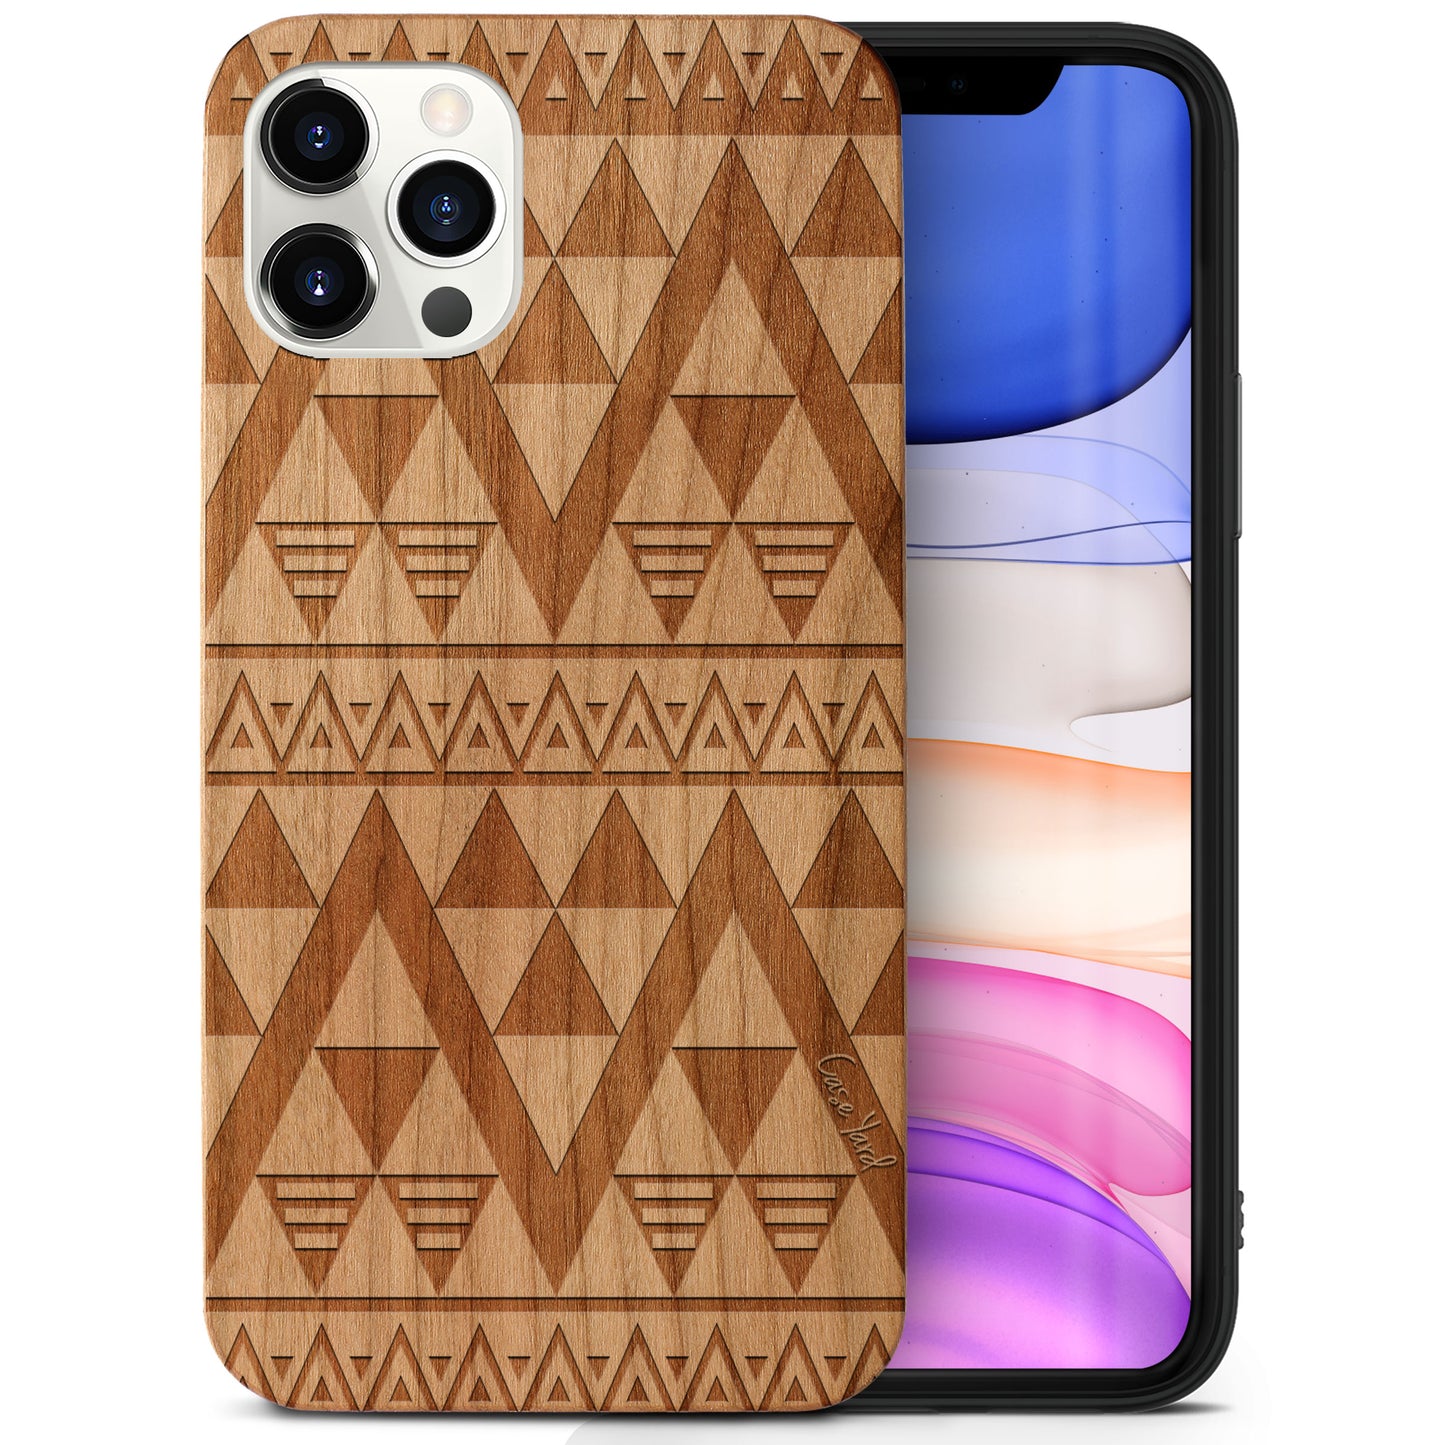 Wooden Cell Phone Case Cover, Laser Engraved case for iPhone & Samsung phone Negative Triangle Pattern Design